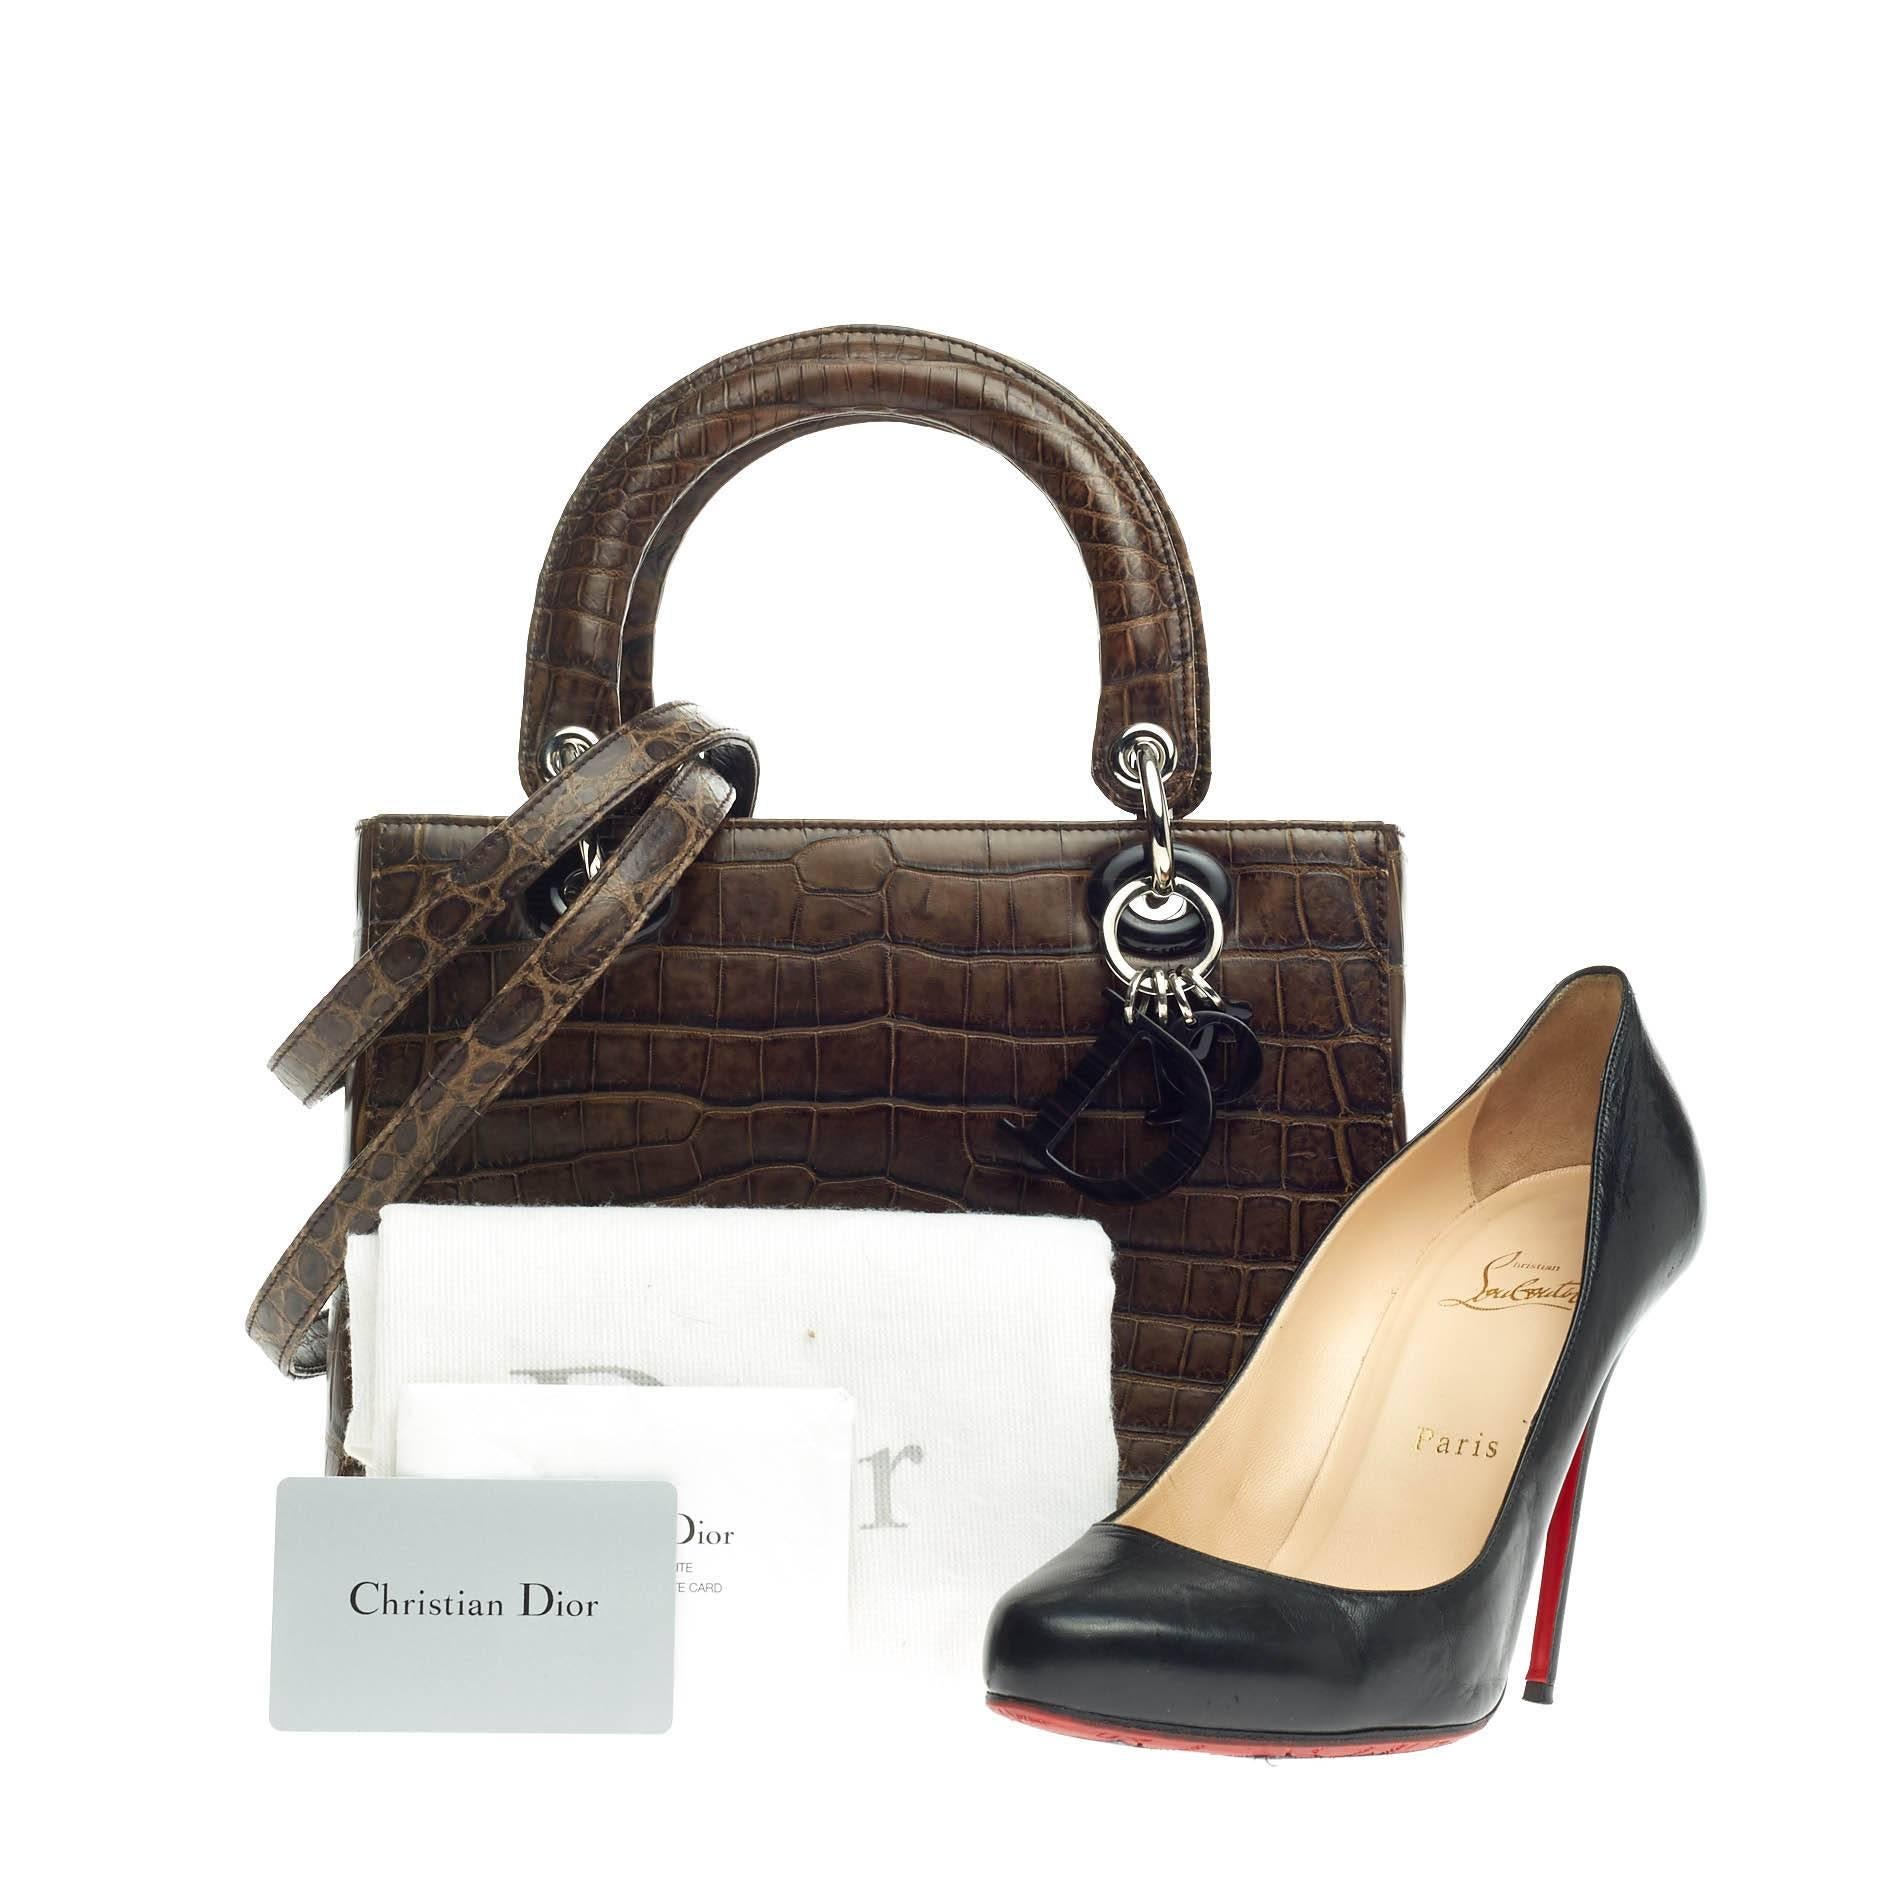 This authentic Christian Dior Lady Dior Crocodile Medium presented in the brand's Fall/Winter 2012 Collection is a coveted bag made for avid Dior fashionistas. Crafted from genuine brown crocodile skin, this luxurious, timeless bag features dual